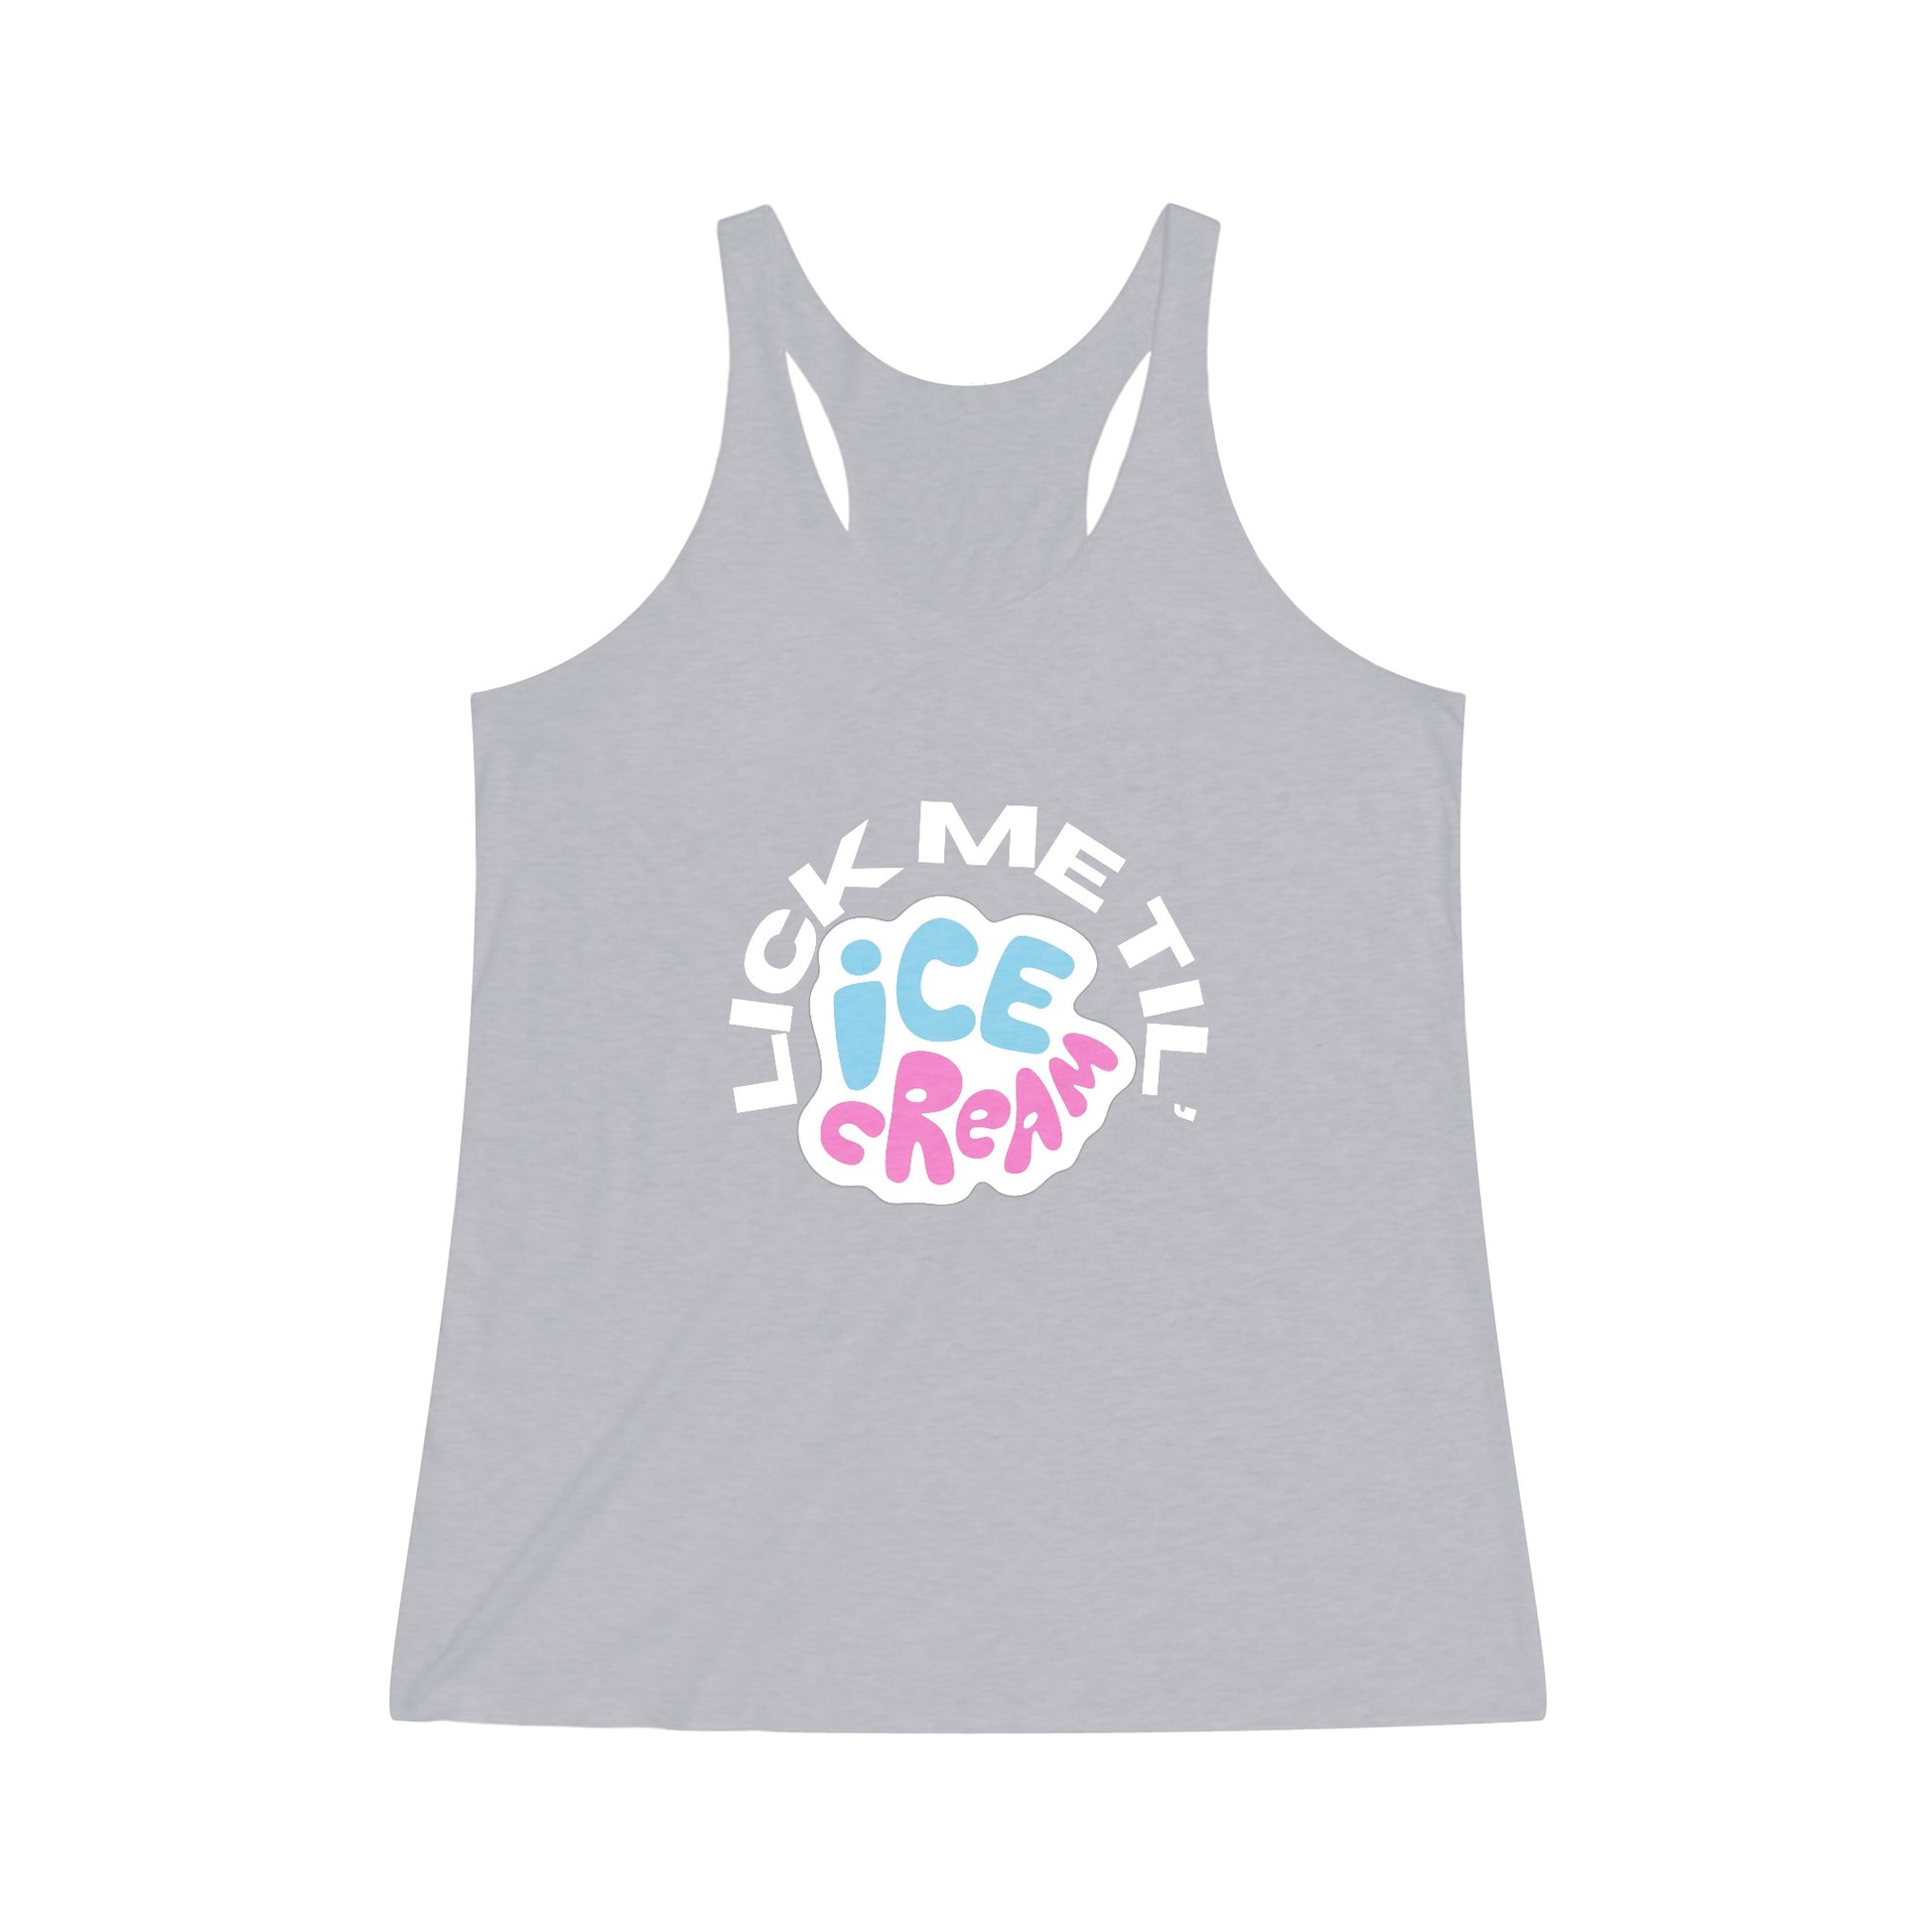 The Stamina for Men Lick me till Ice cream woman's fitted premium heather tank top product shot with white background